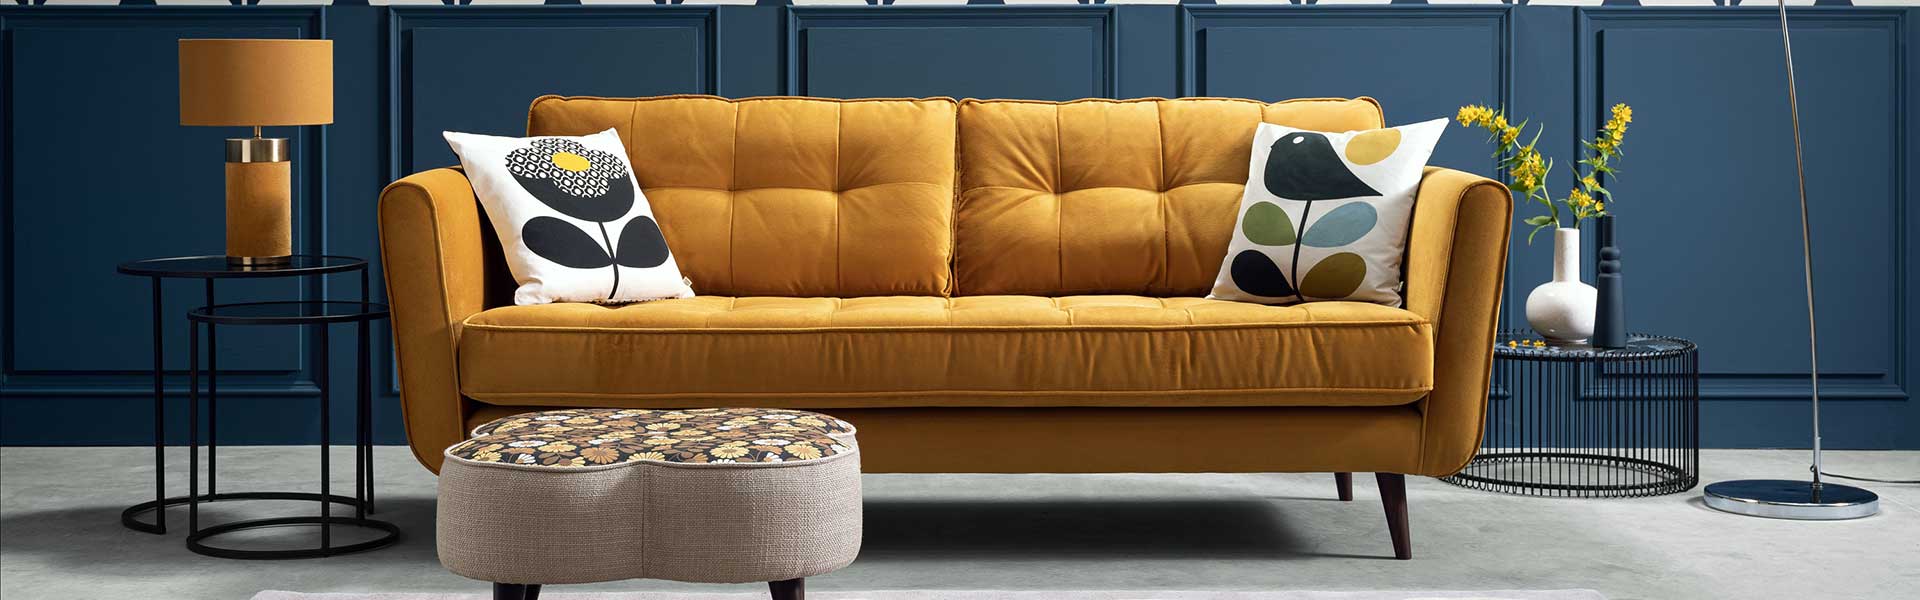 Yellow pincushion sofa with footstll and navy panelled wall behind